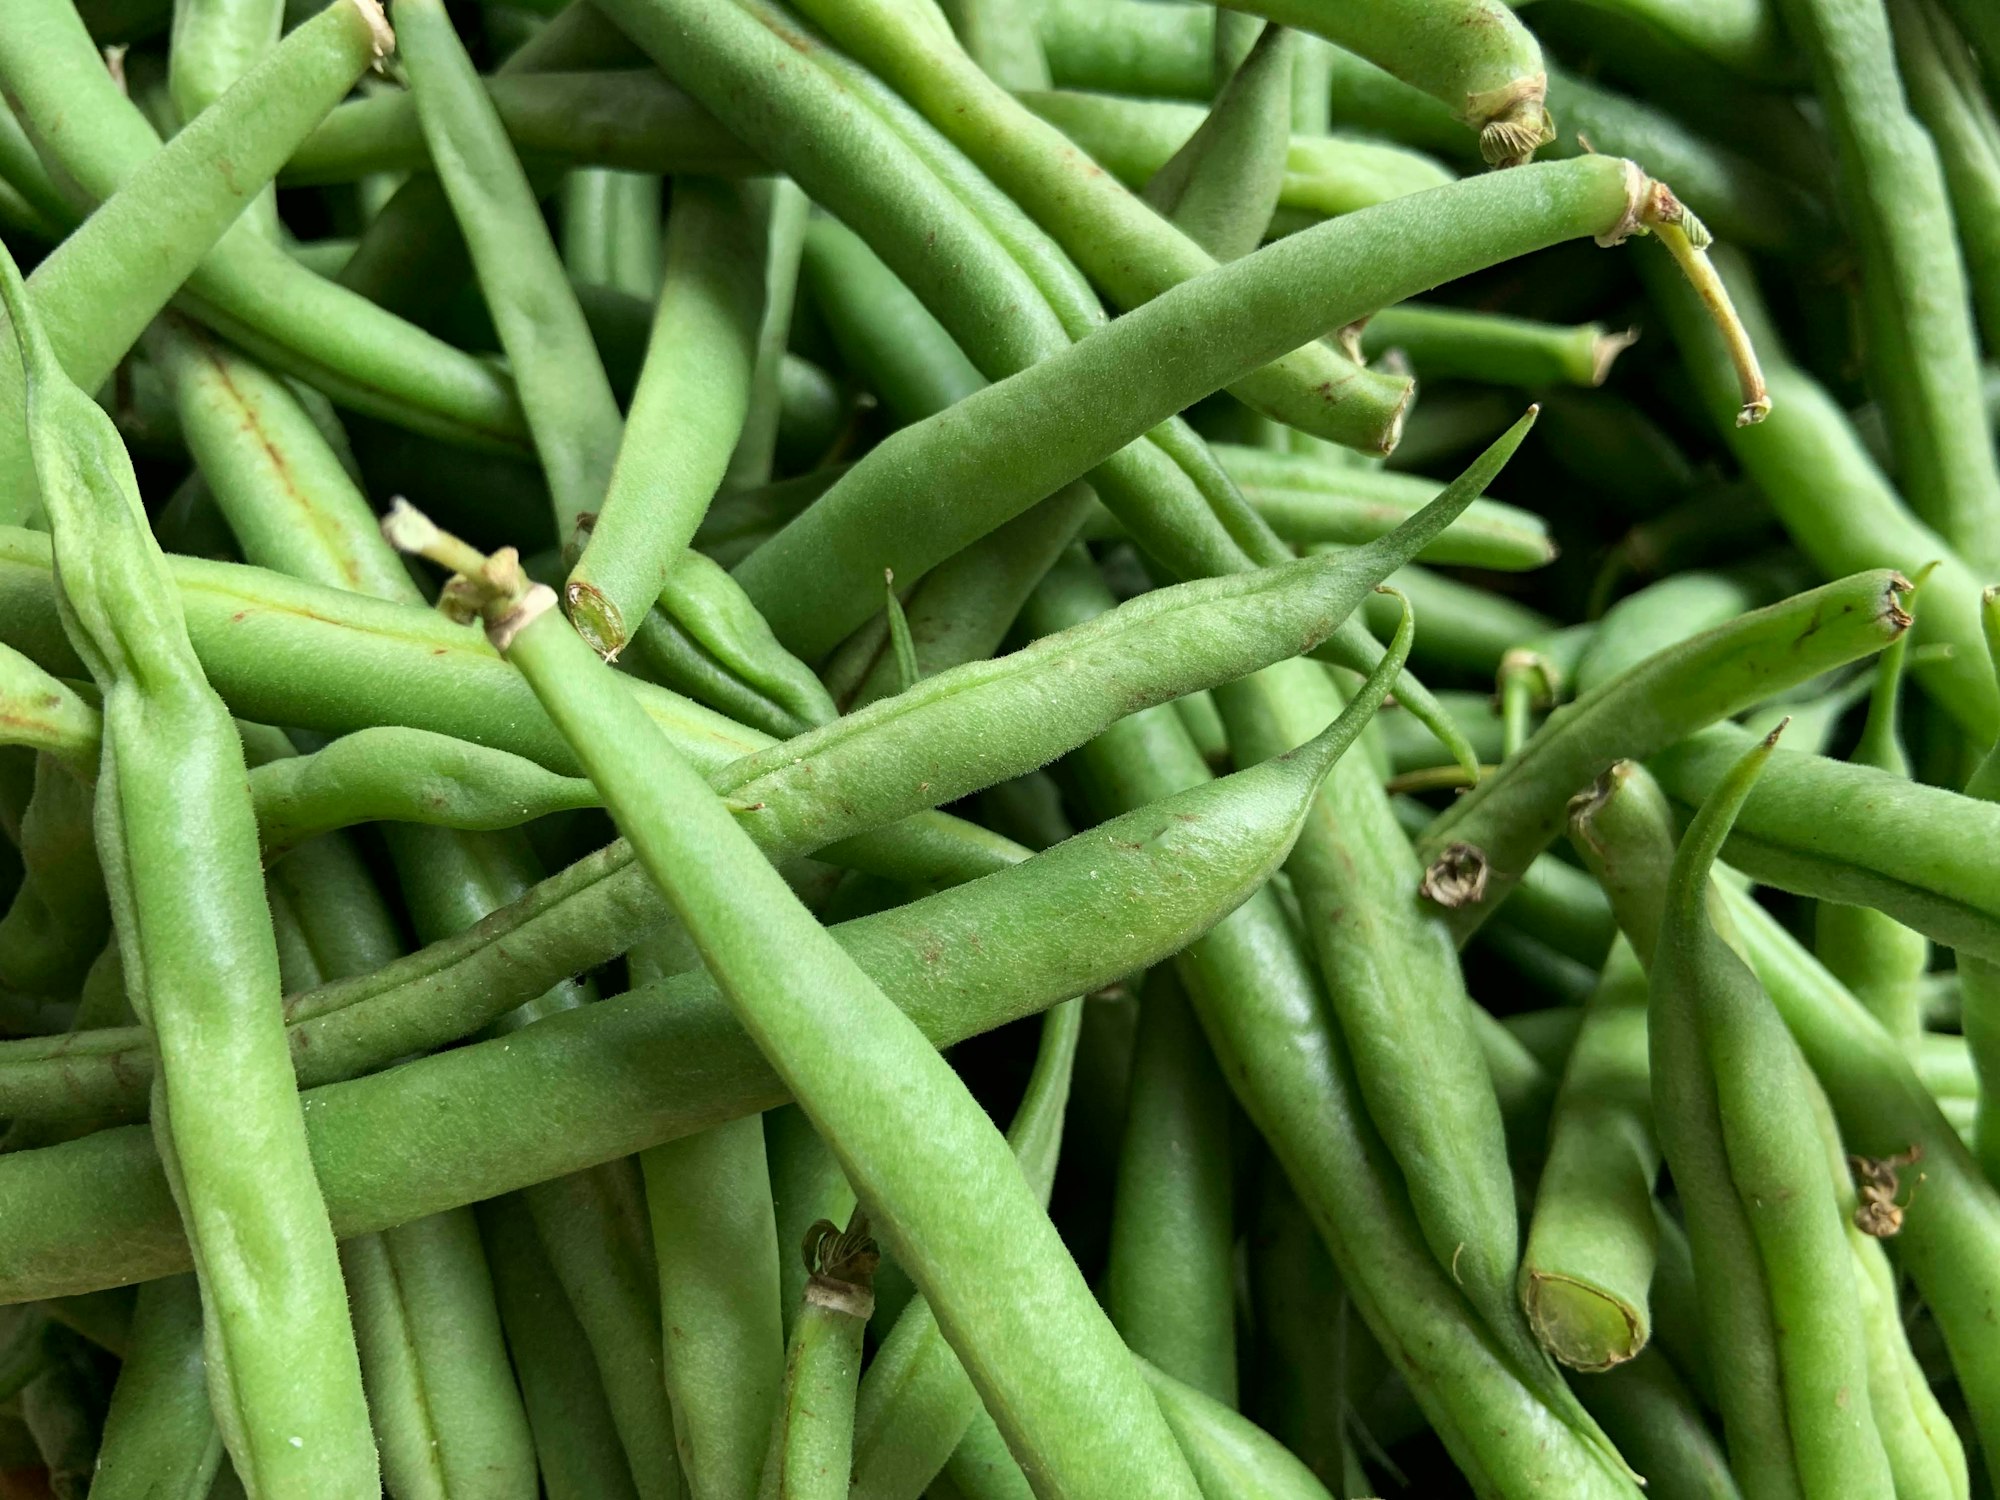 Green beans at a farmer's market in Rehoboth Beach, Delaware.